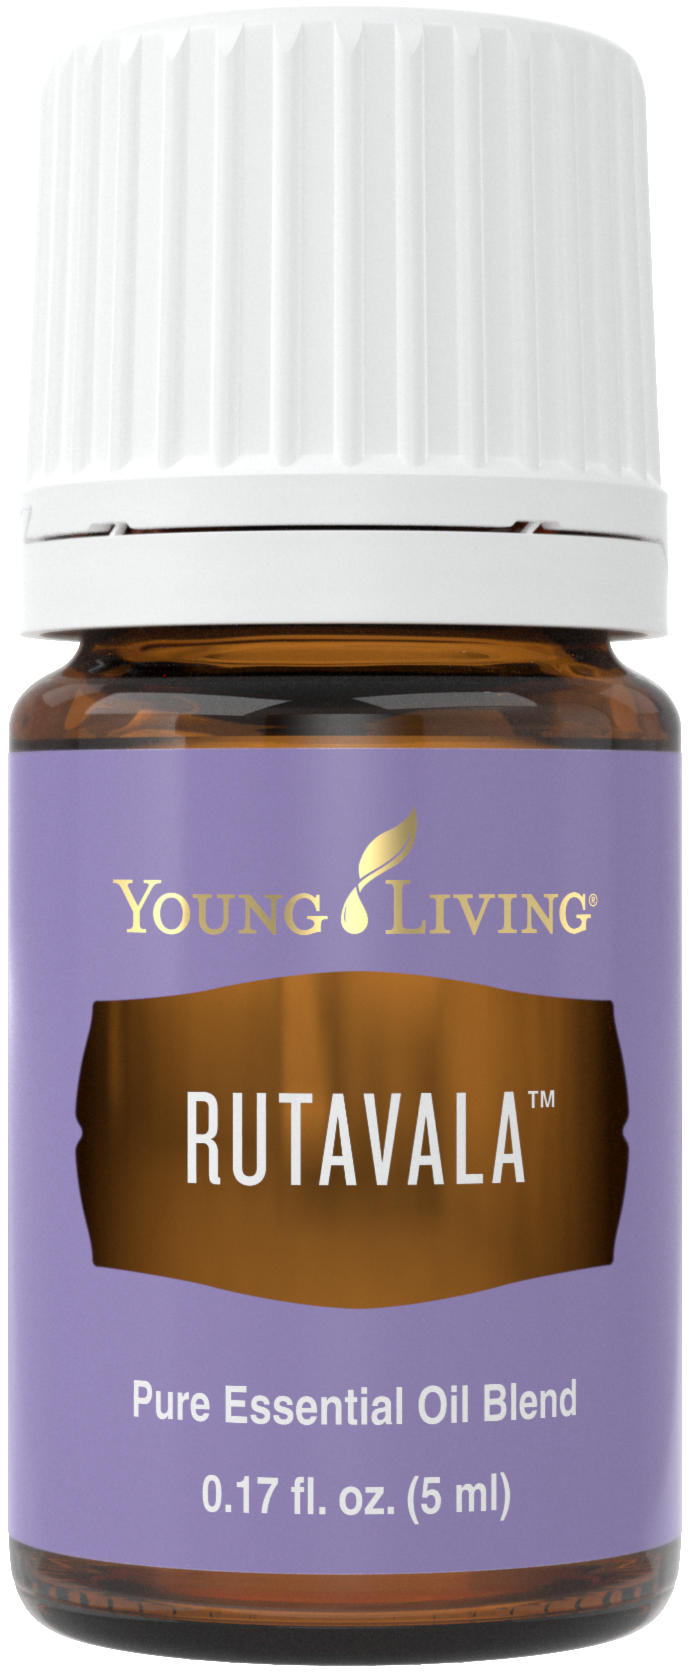 Young Living RutaVala essential oil blend